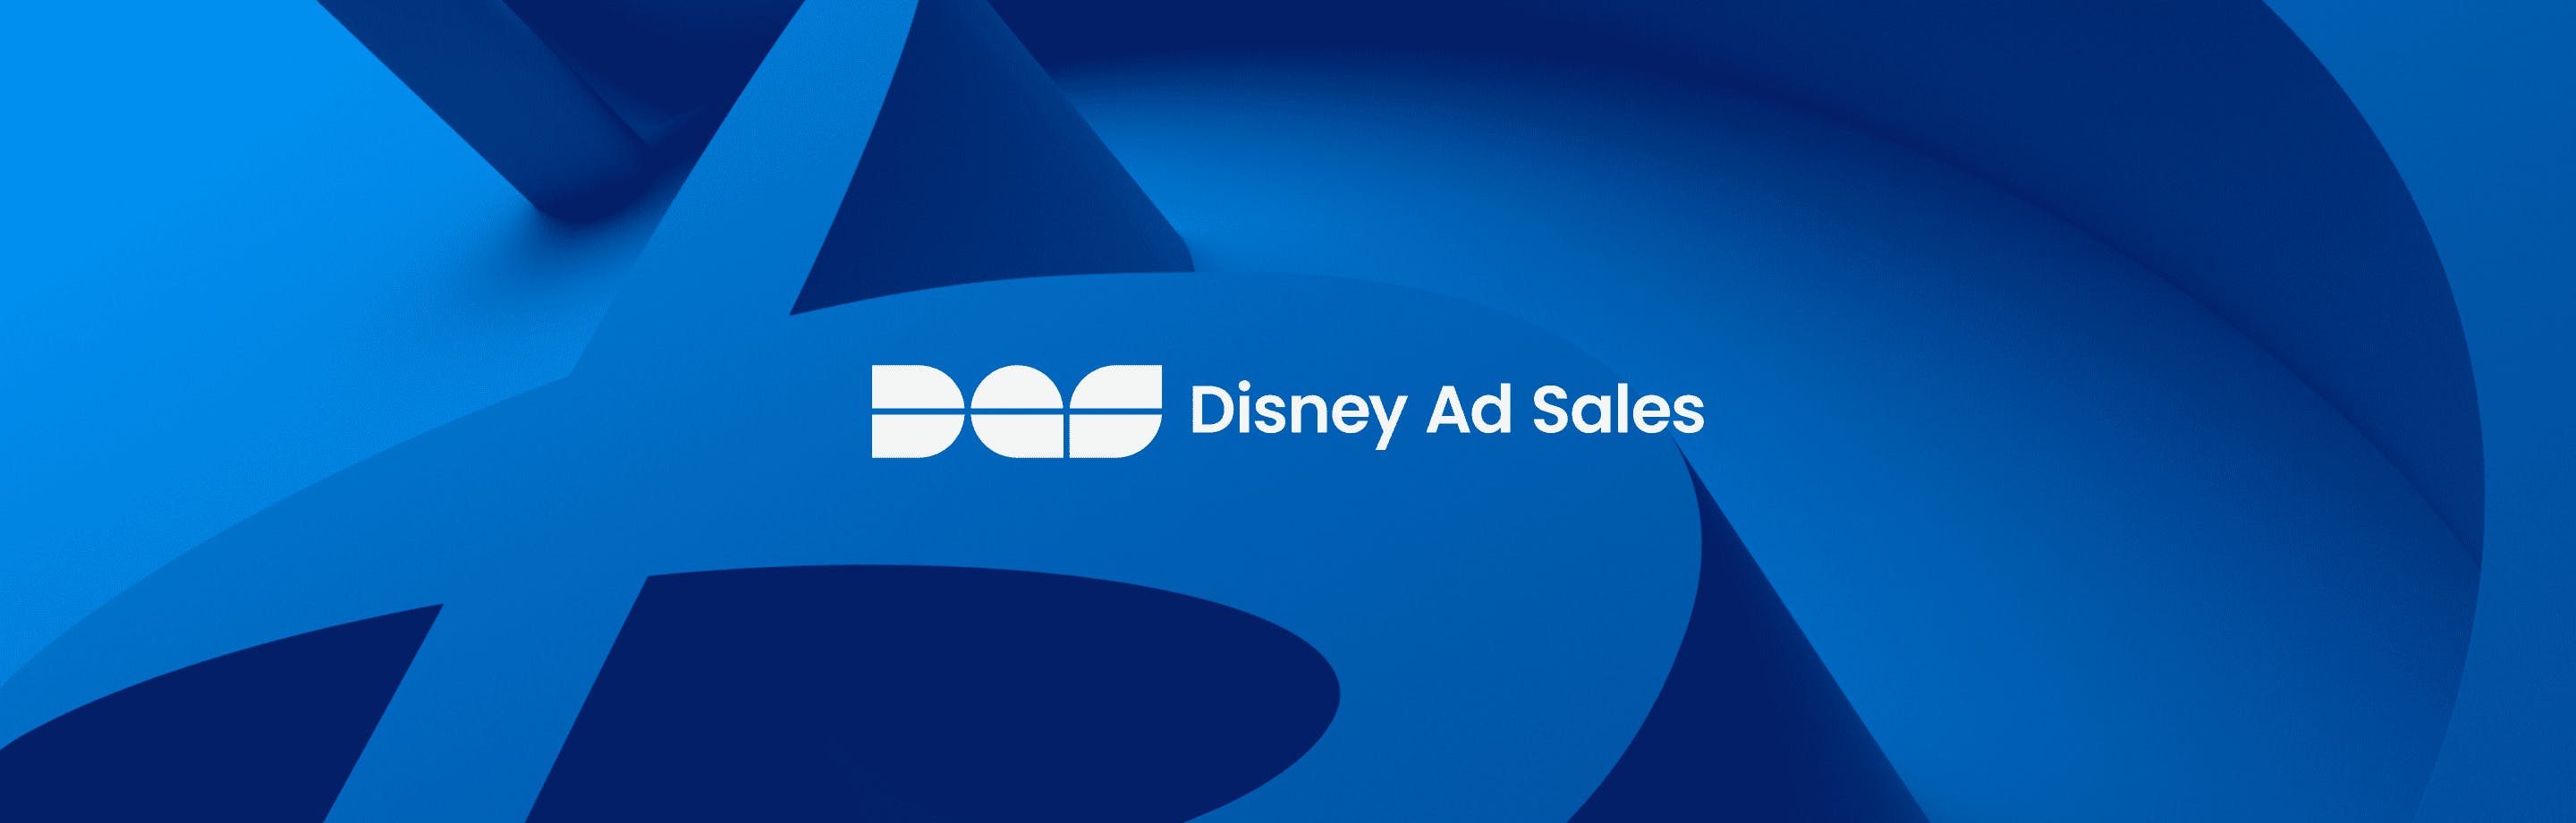 Disney Ad Sales project cover